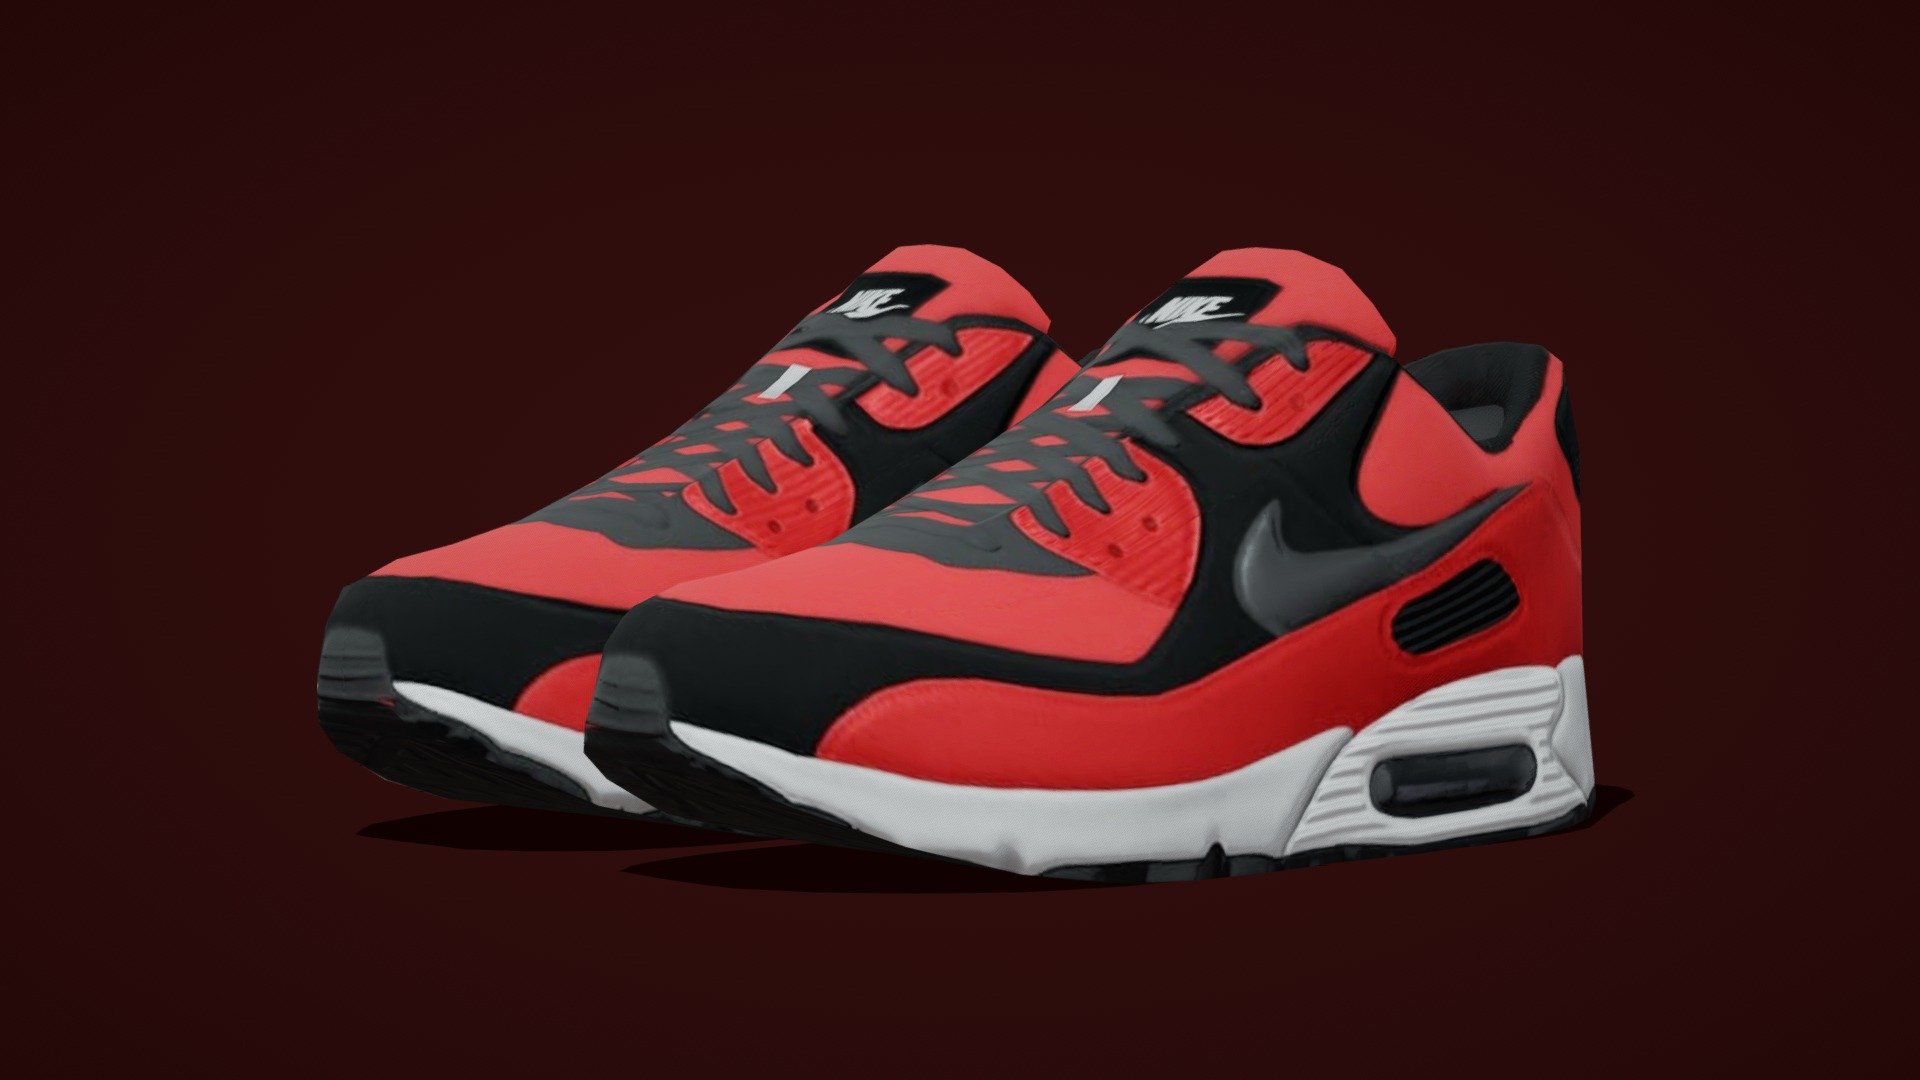 Airmax NIKE Shoes model in very low poly style.

GLB File size under 400 kb

Model : Poly Count - 1328 Tris.

Texture : 1k resolution.

Best suitable for Metaverse projects.

Pack of 10 : https://skfb.ly/oQuKA

Highpoly Model : https://skfb.ly/oxPBZ - Airmax - Nike Shoes 02 - Very Low Poly - Buy Royalty Free 3D model by 5th Dimension (@5th-Dimension) 3d model